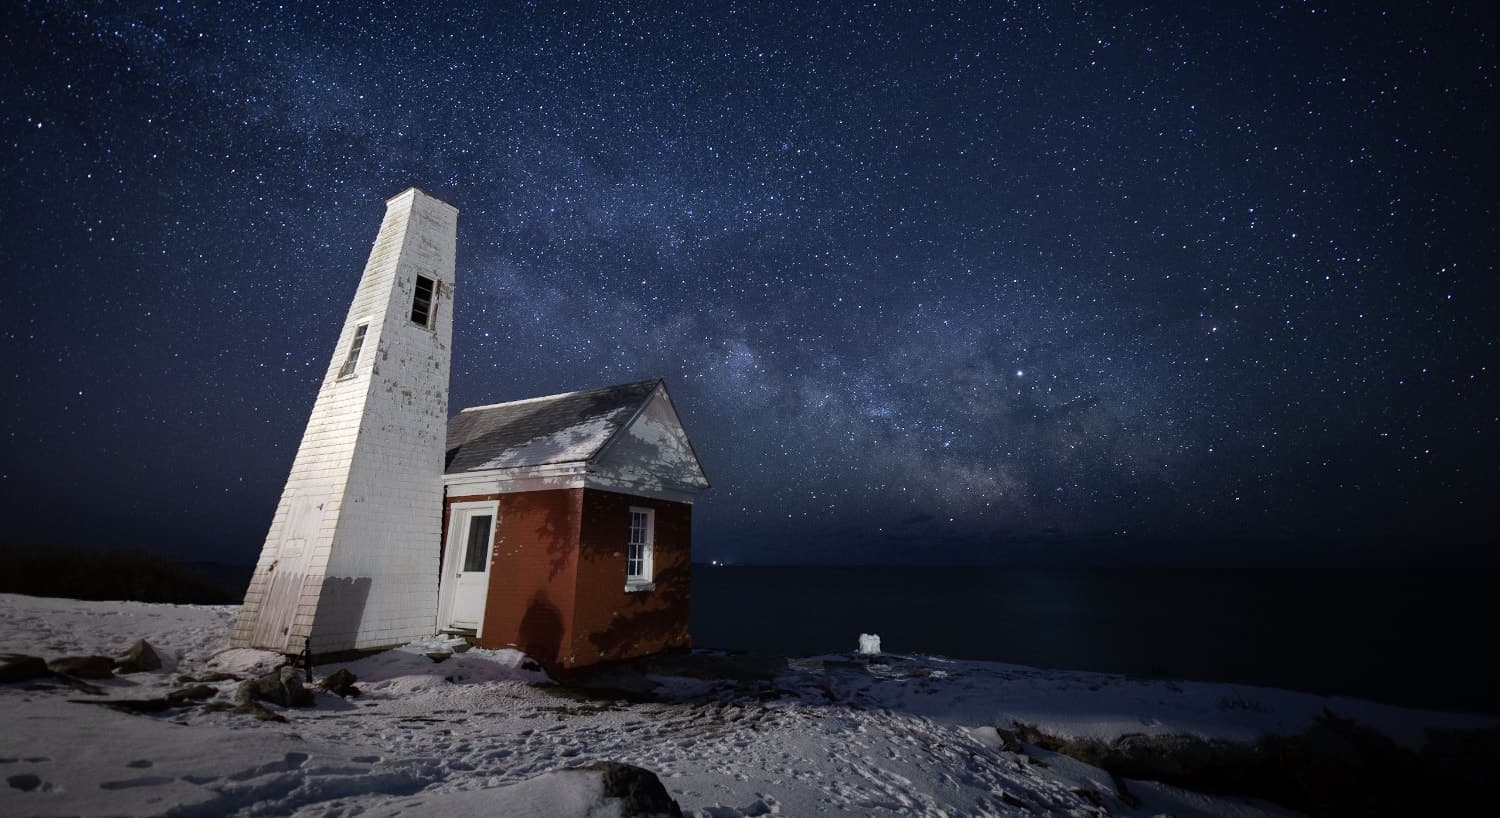 Small lighthouse surrounded by snow near the ocean at night with the sky full of stars